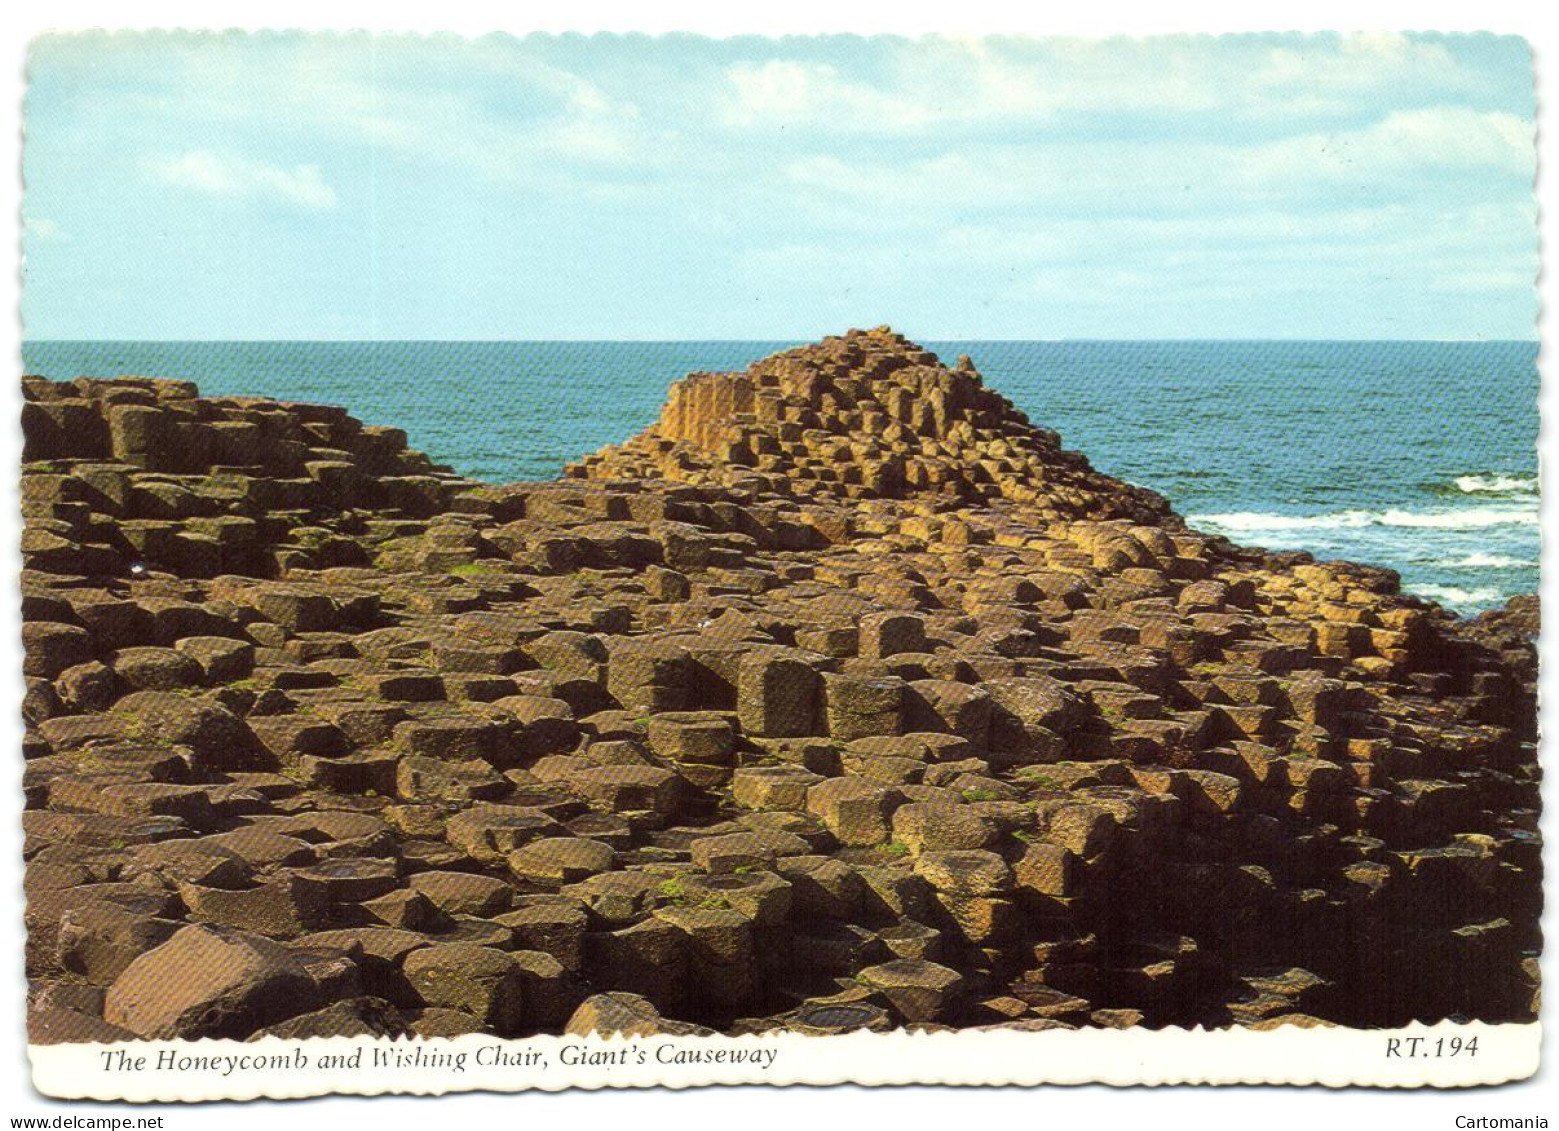 The Honeycomb And Wishing Chair - Giant's Causeway - Antrim